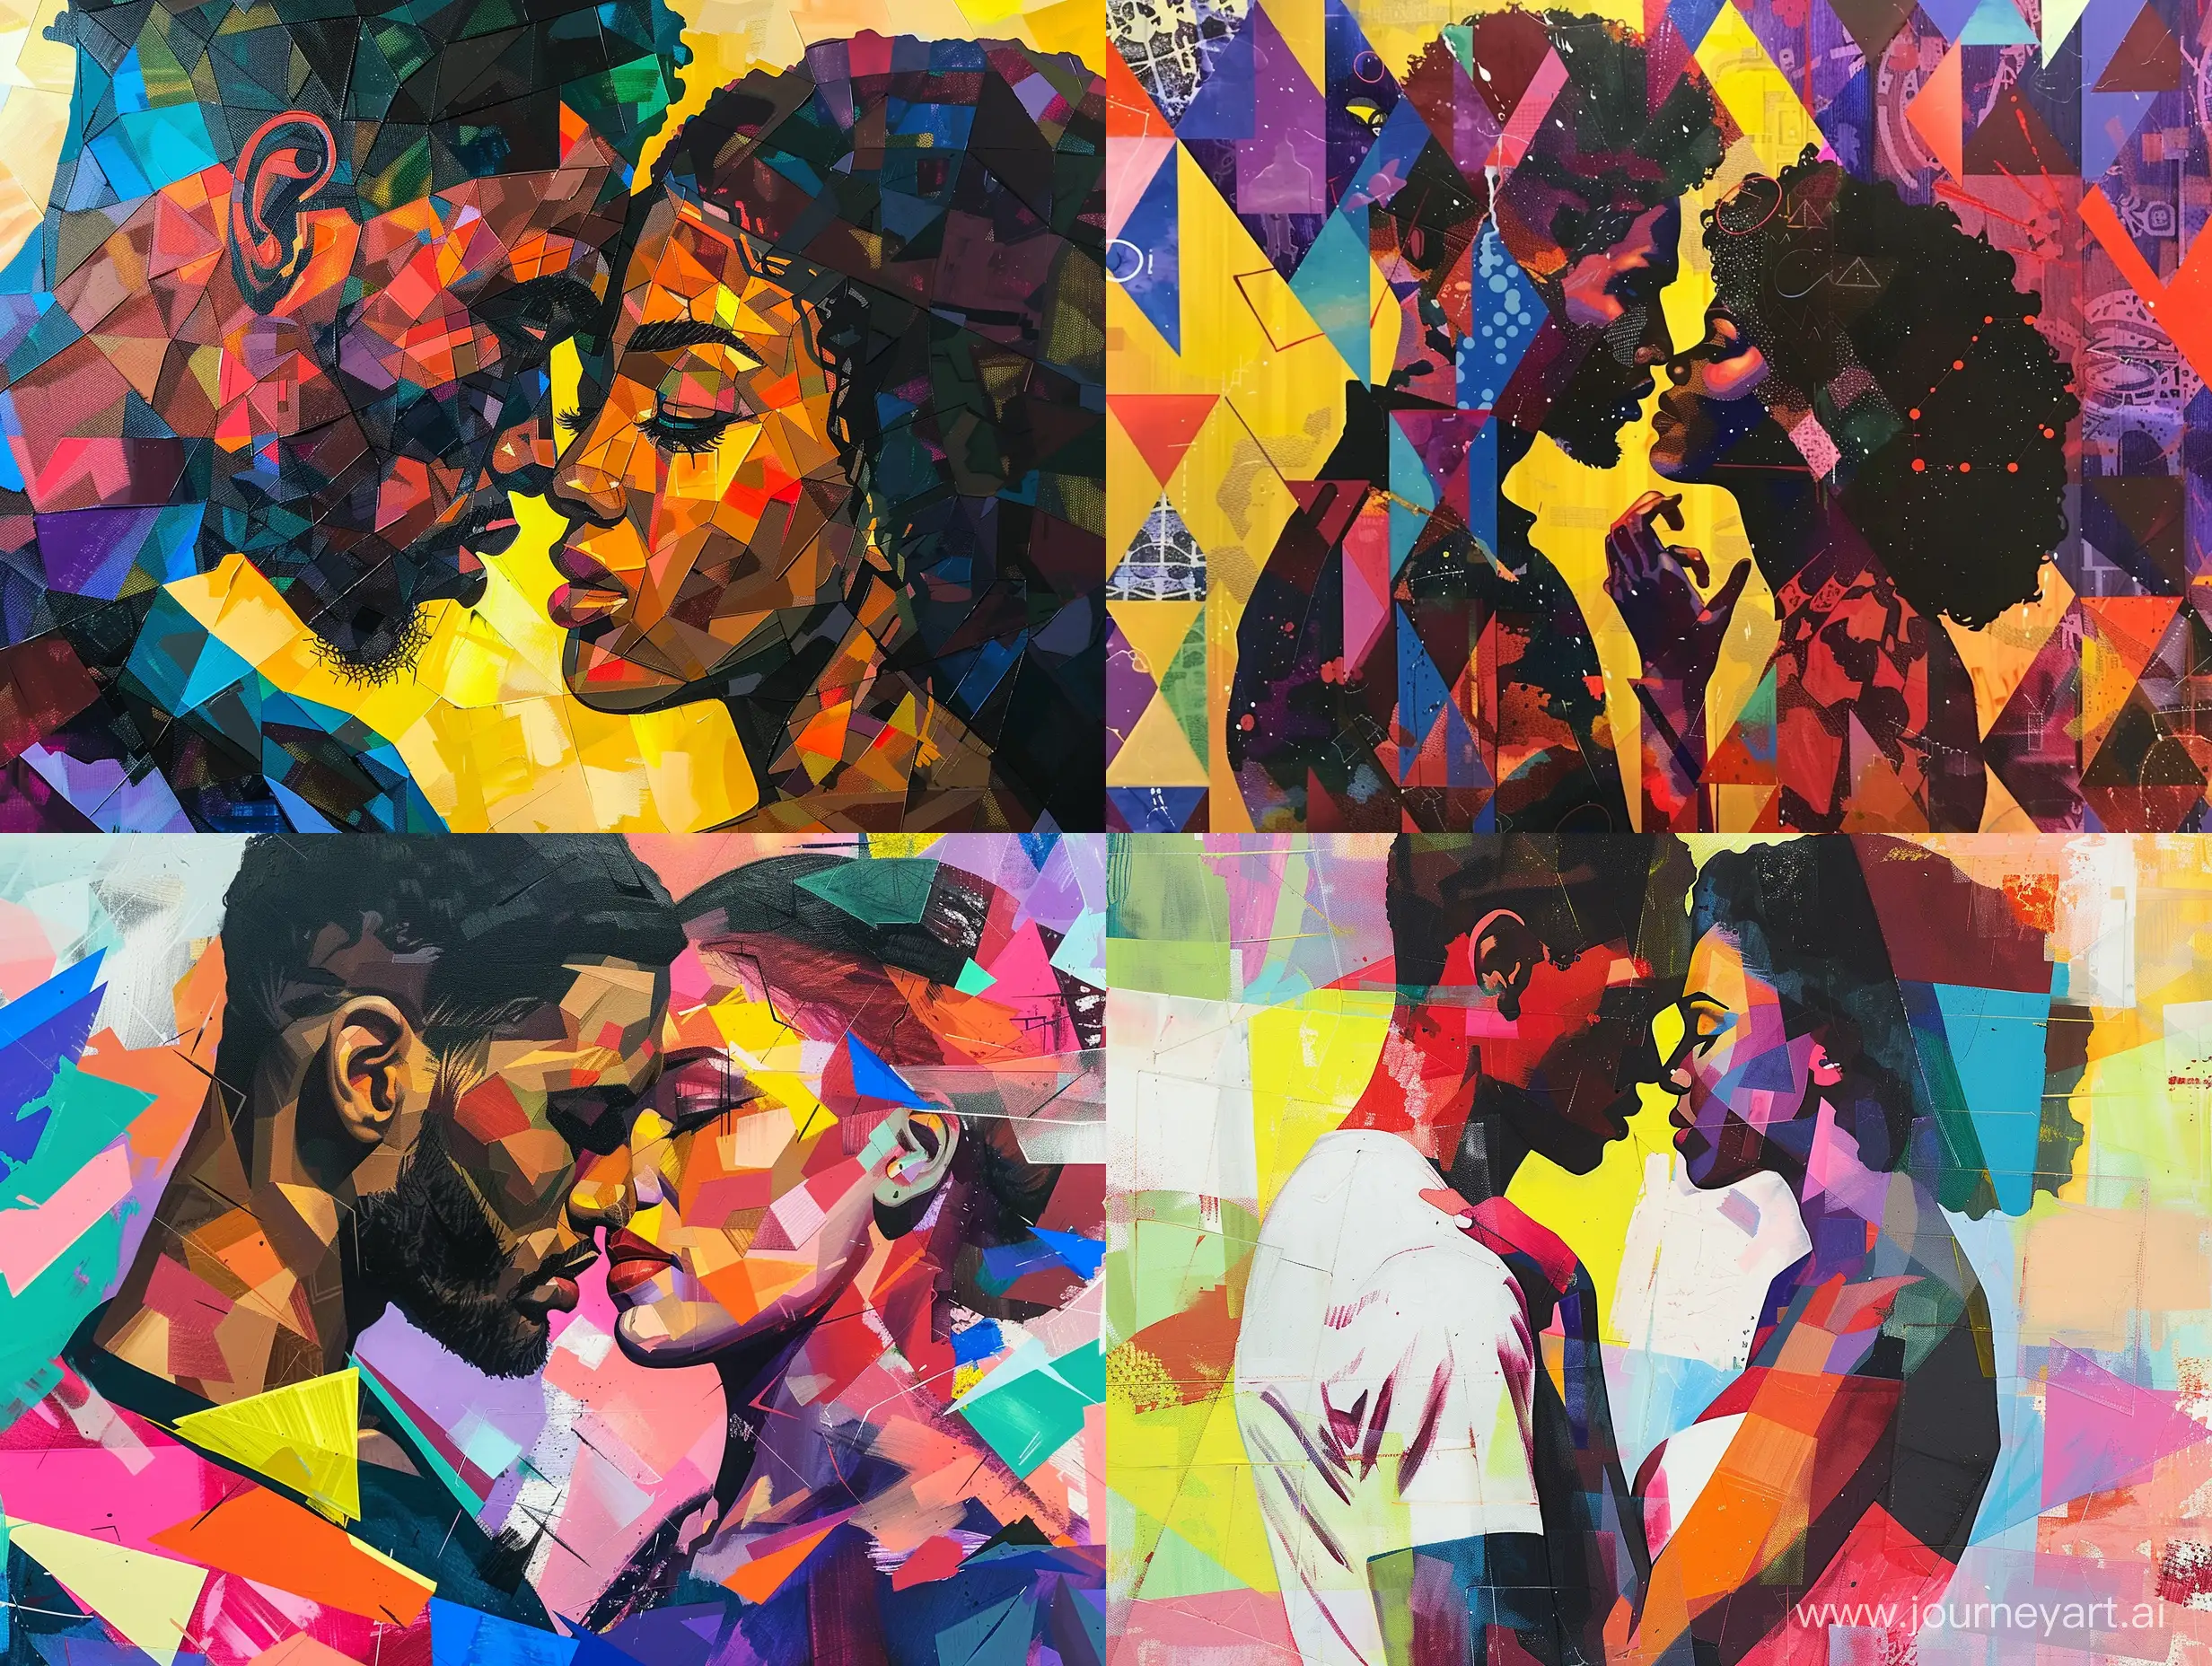 Abstract-Geometric-Love-Vivid-Acrylic-Art-Inspired-by-Kehinde-Wiley-and-Luis-Royo